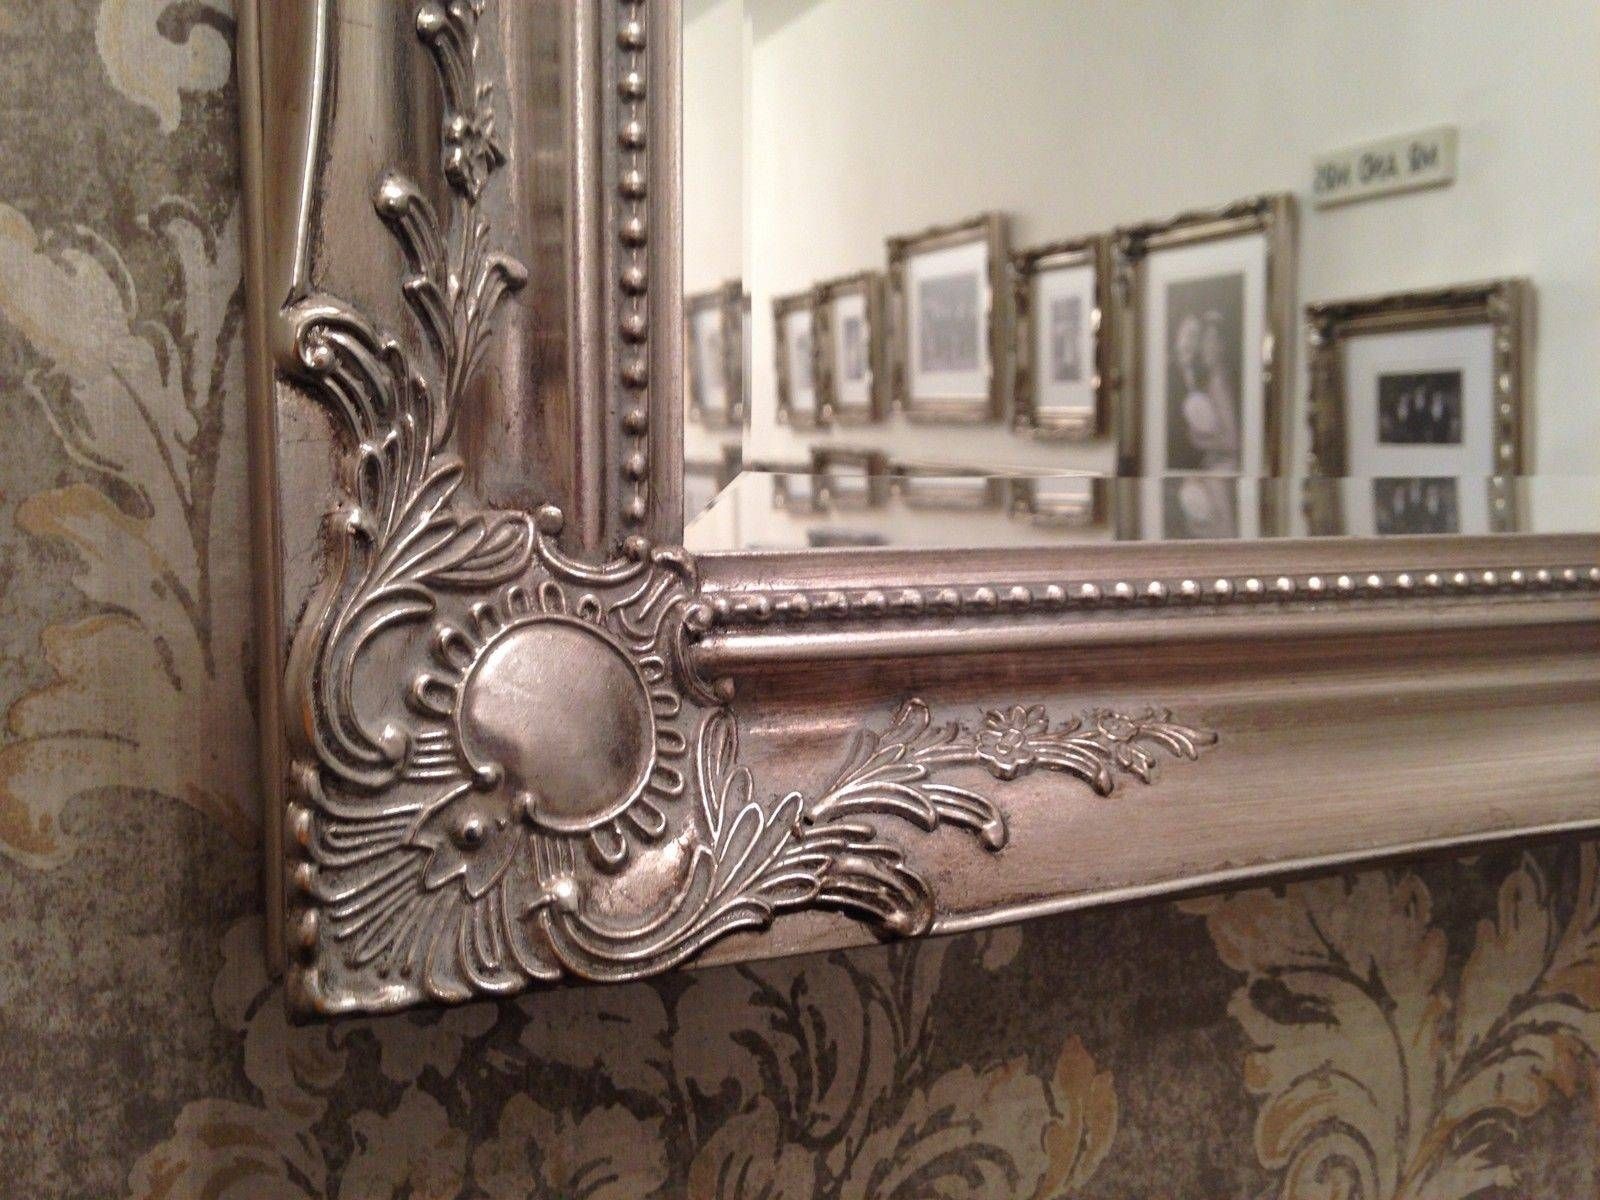 X Large Antique Silver Shabby Chic Ornate Decorative Wall Mirror Pertaining To Round Shabby Chic Mirrors (View 4 of 15)